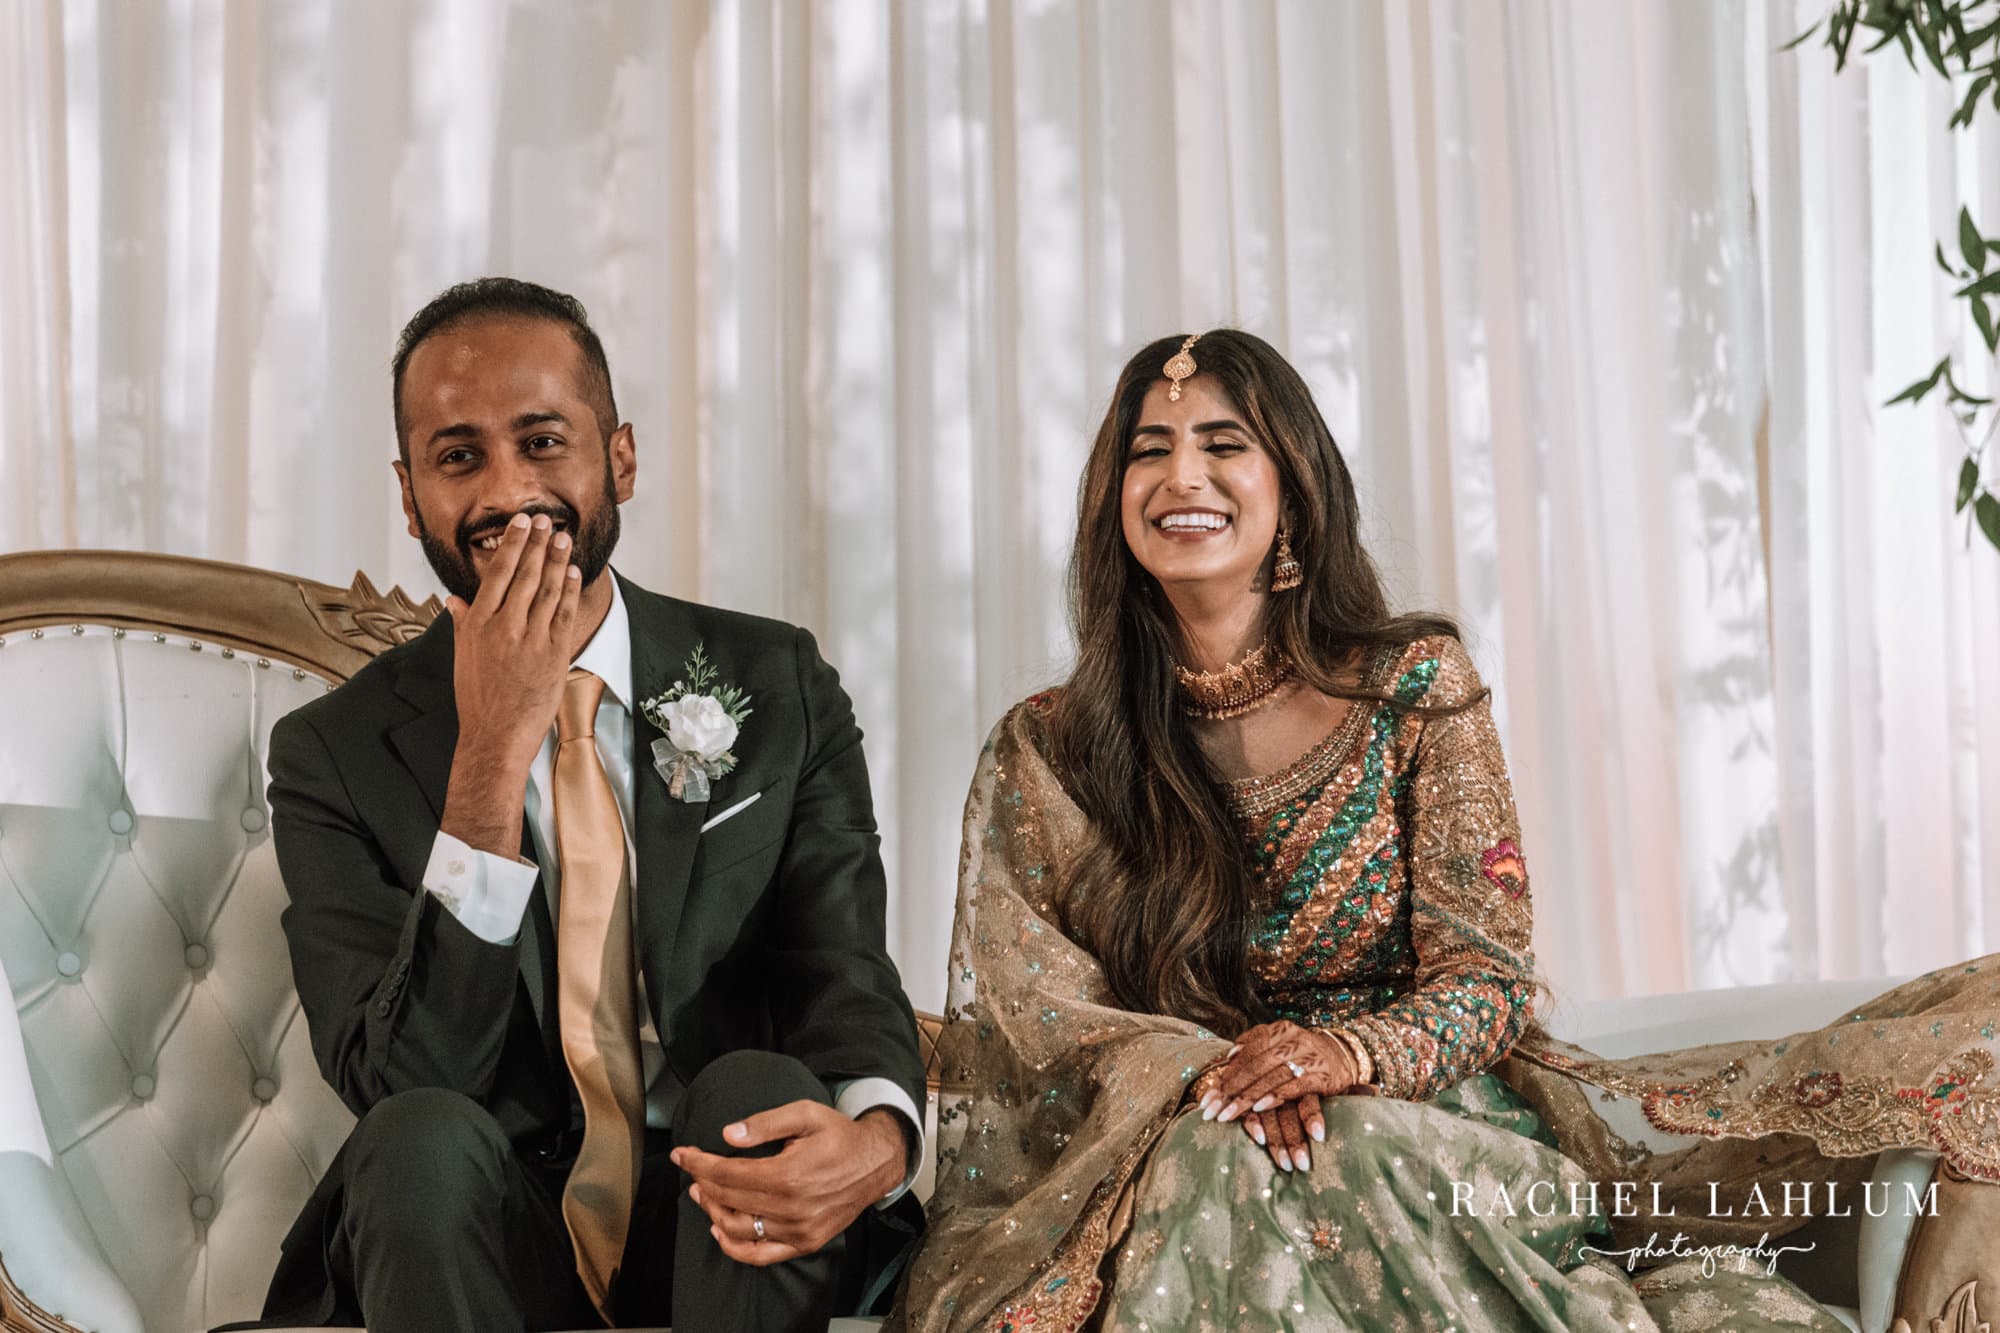 Bride and groom laugh during speeches at Walima celebration.